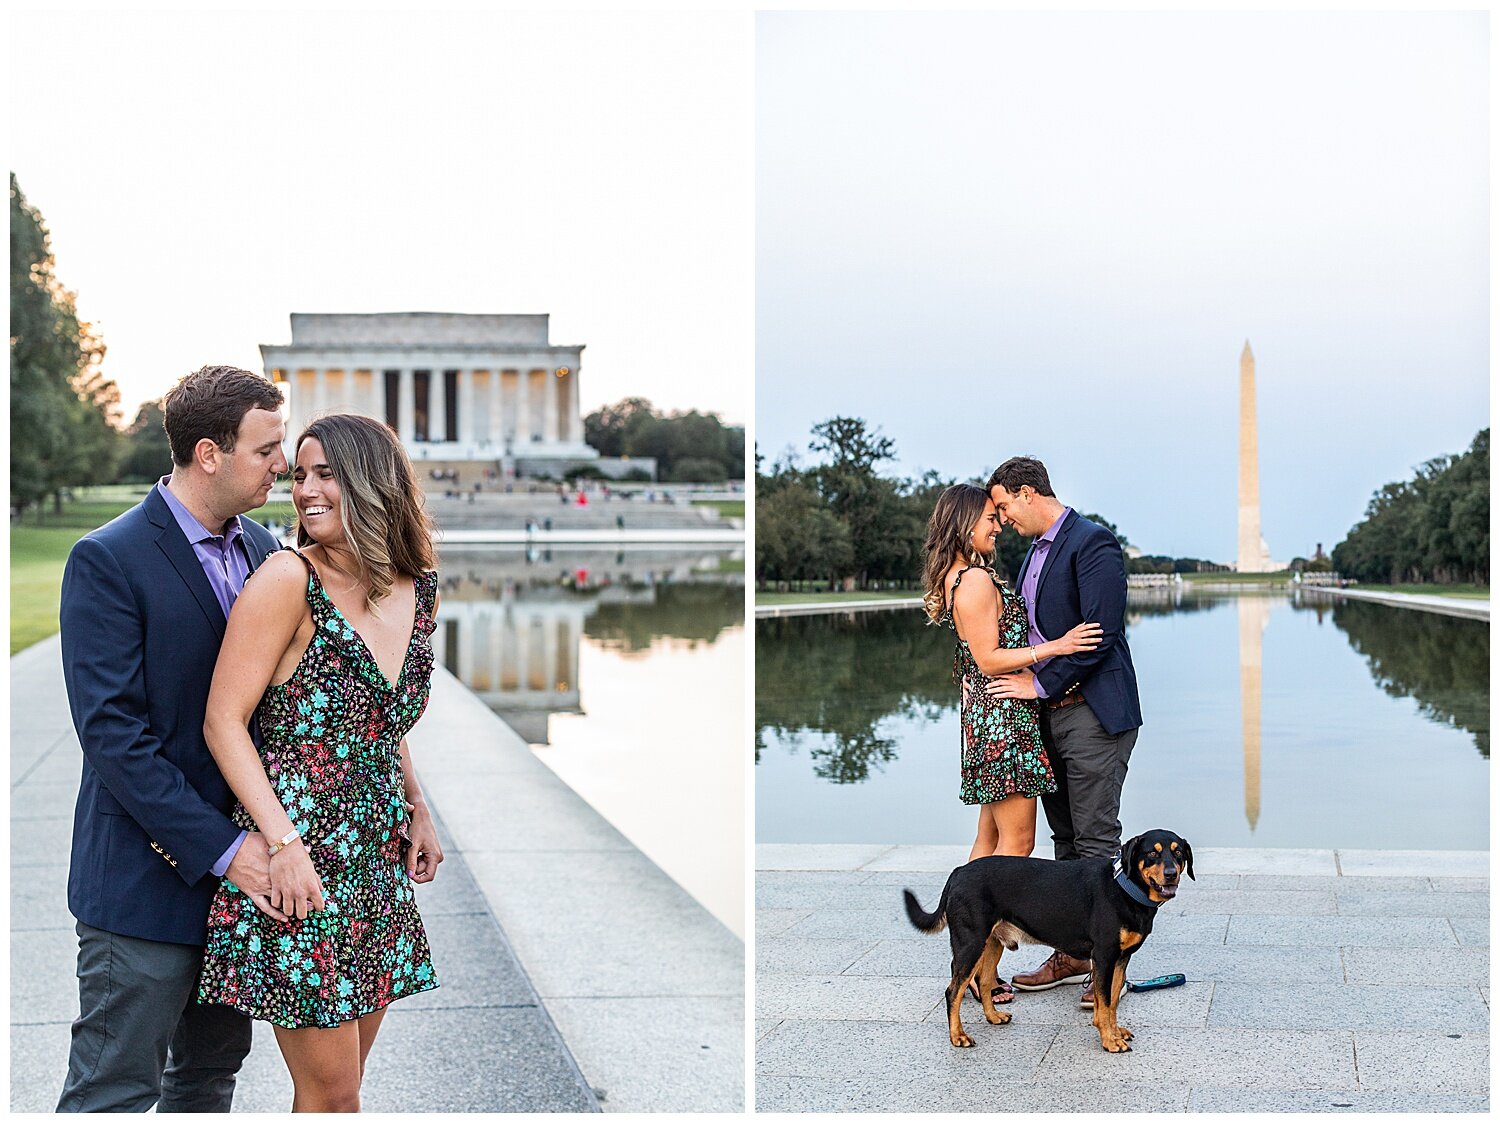 Haylie Chris National Mall Engagement Session 2020 Living Radiant Photography_0026.jpg